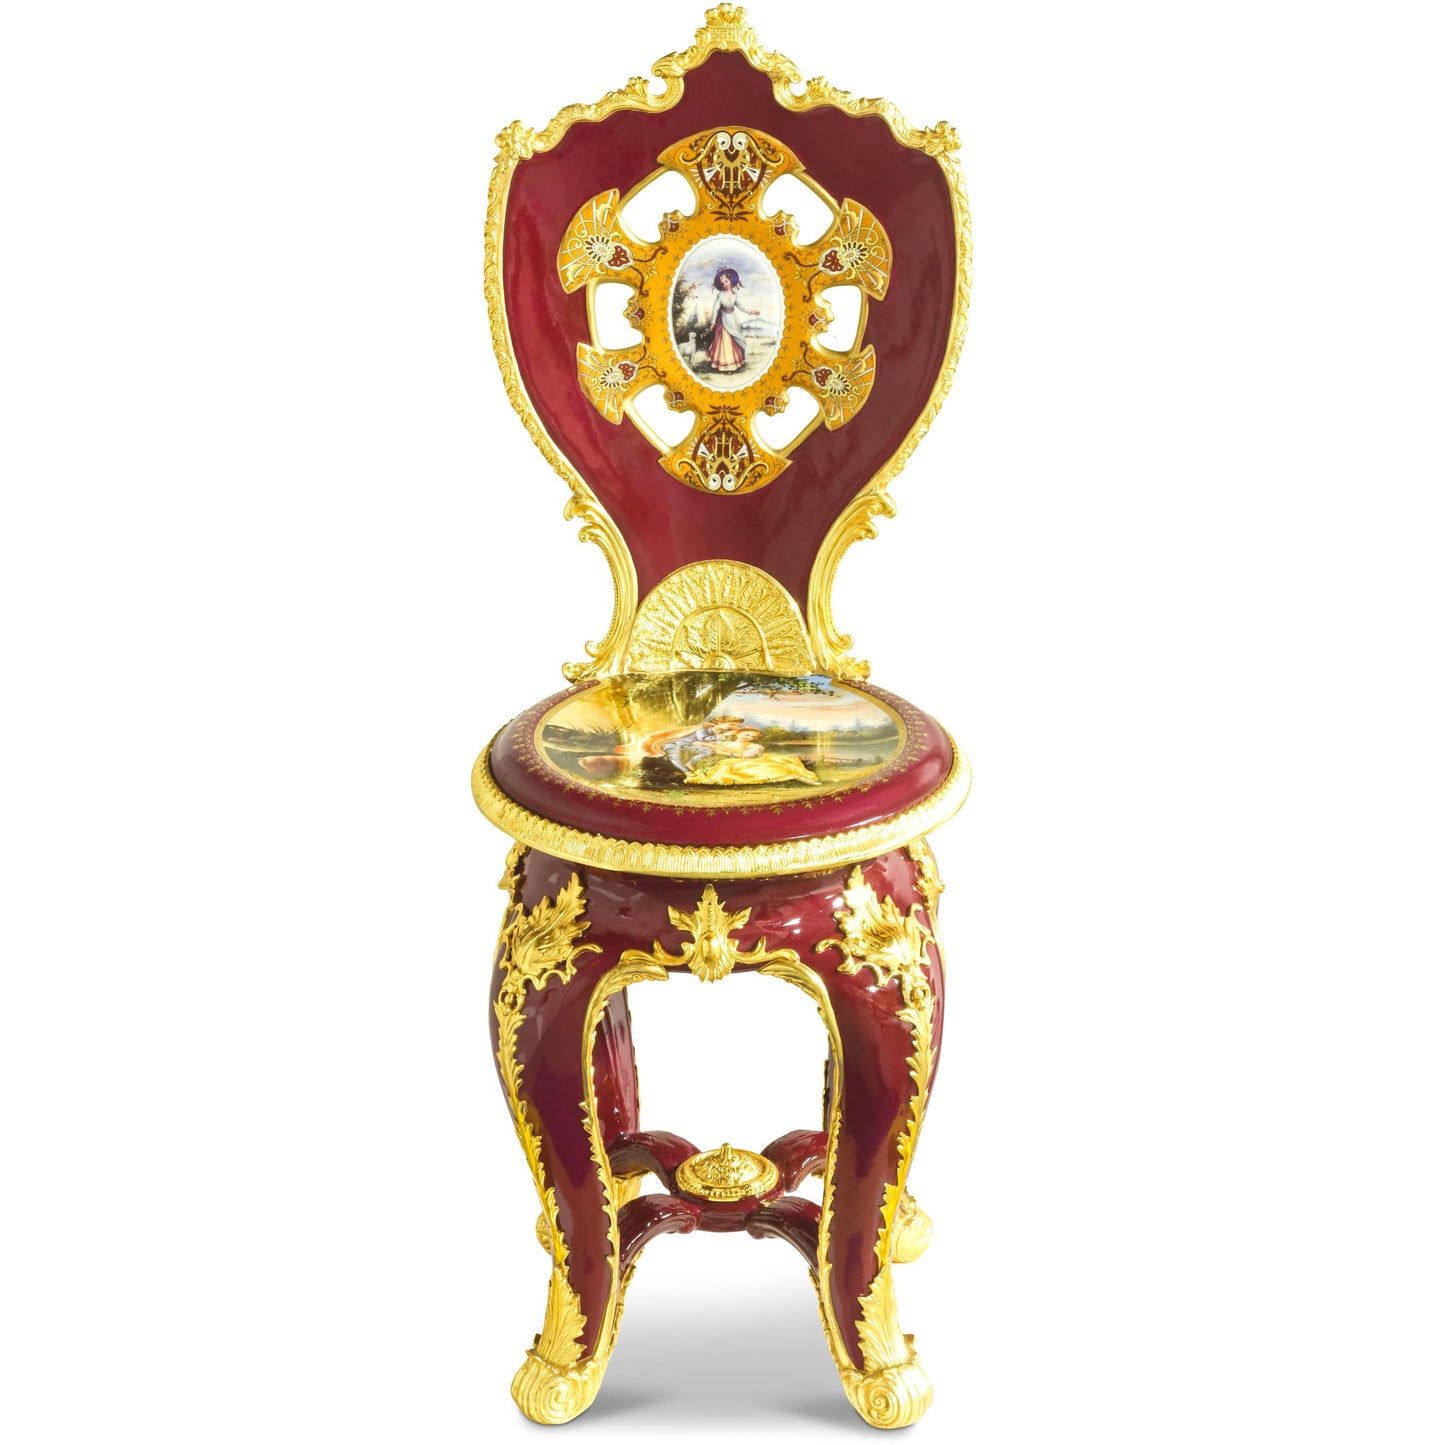 Stunning Hand-painted Red Louis XV Style Porcelain And Bronze Chair